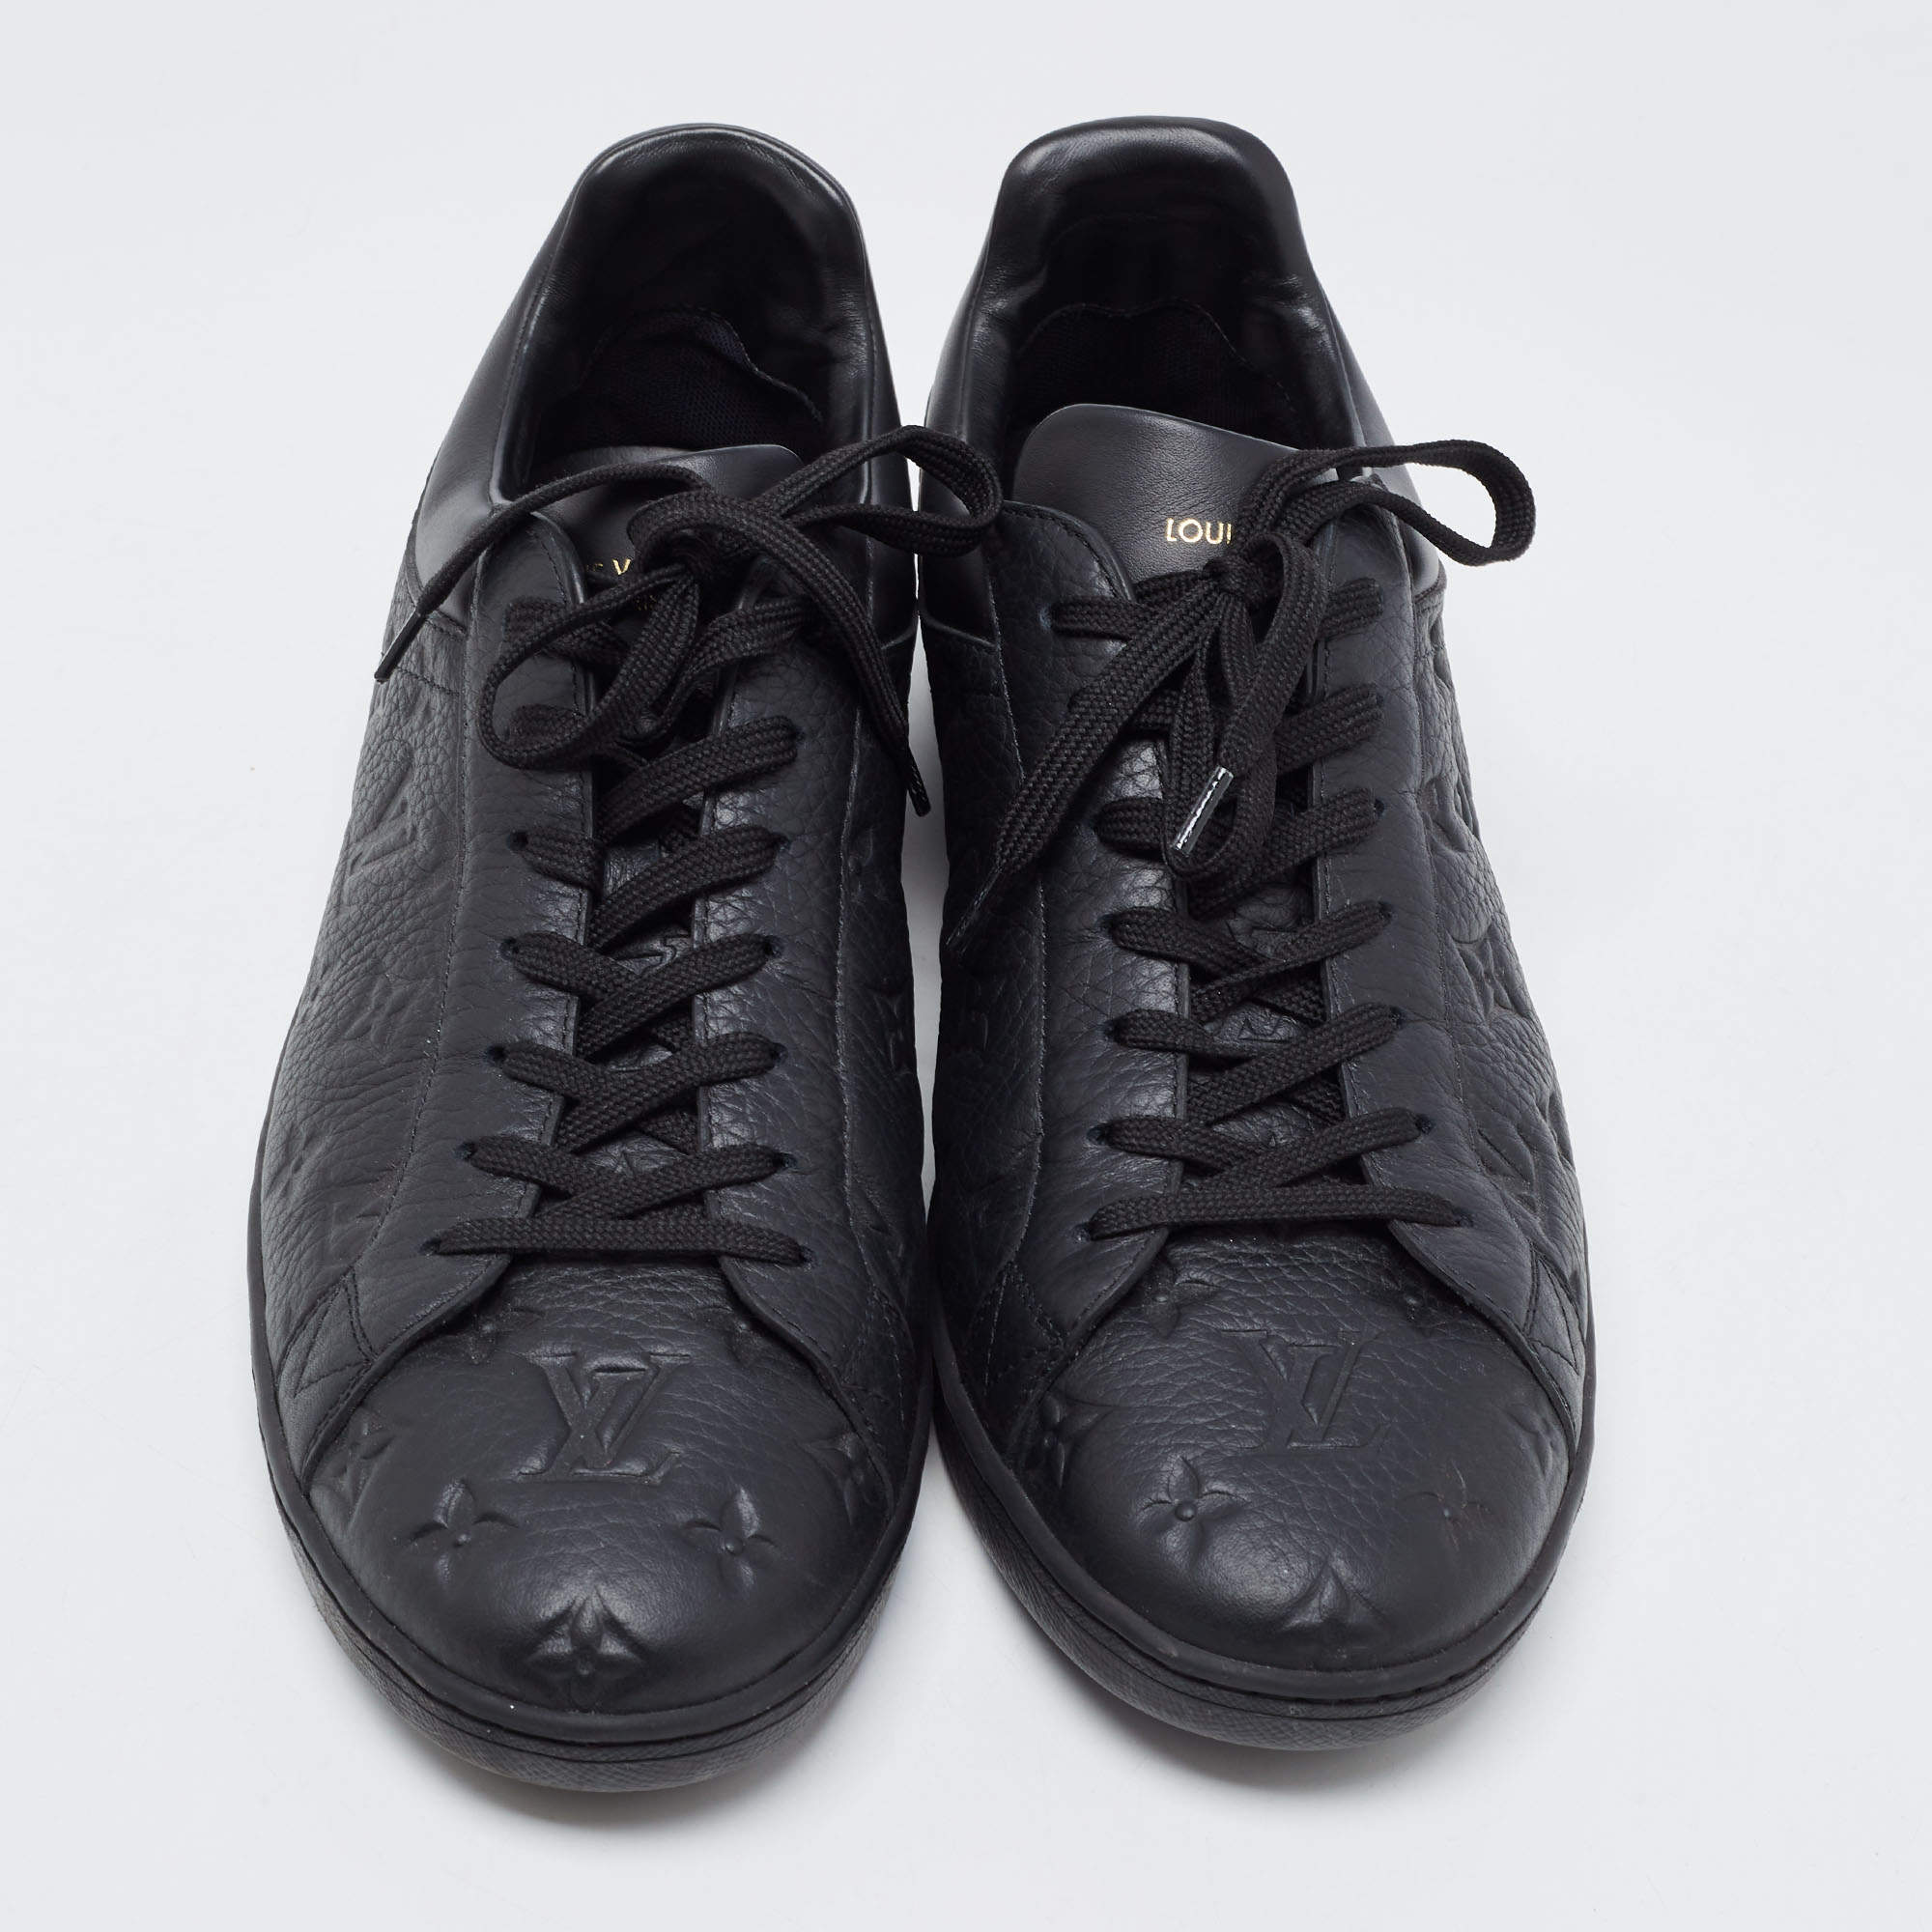 Luxembourg leather low trainers Louis Vuitton Black size 41.5 EU in Leather  - 32261590